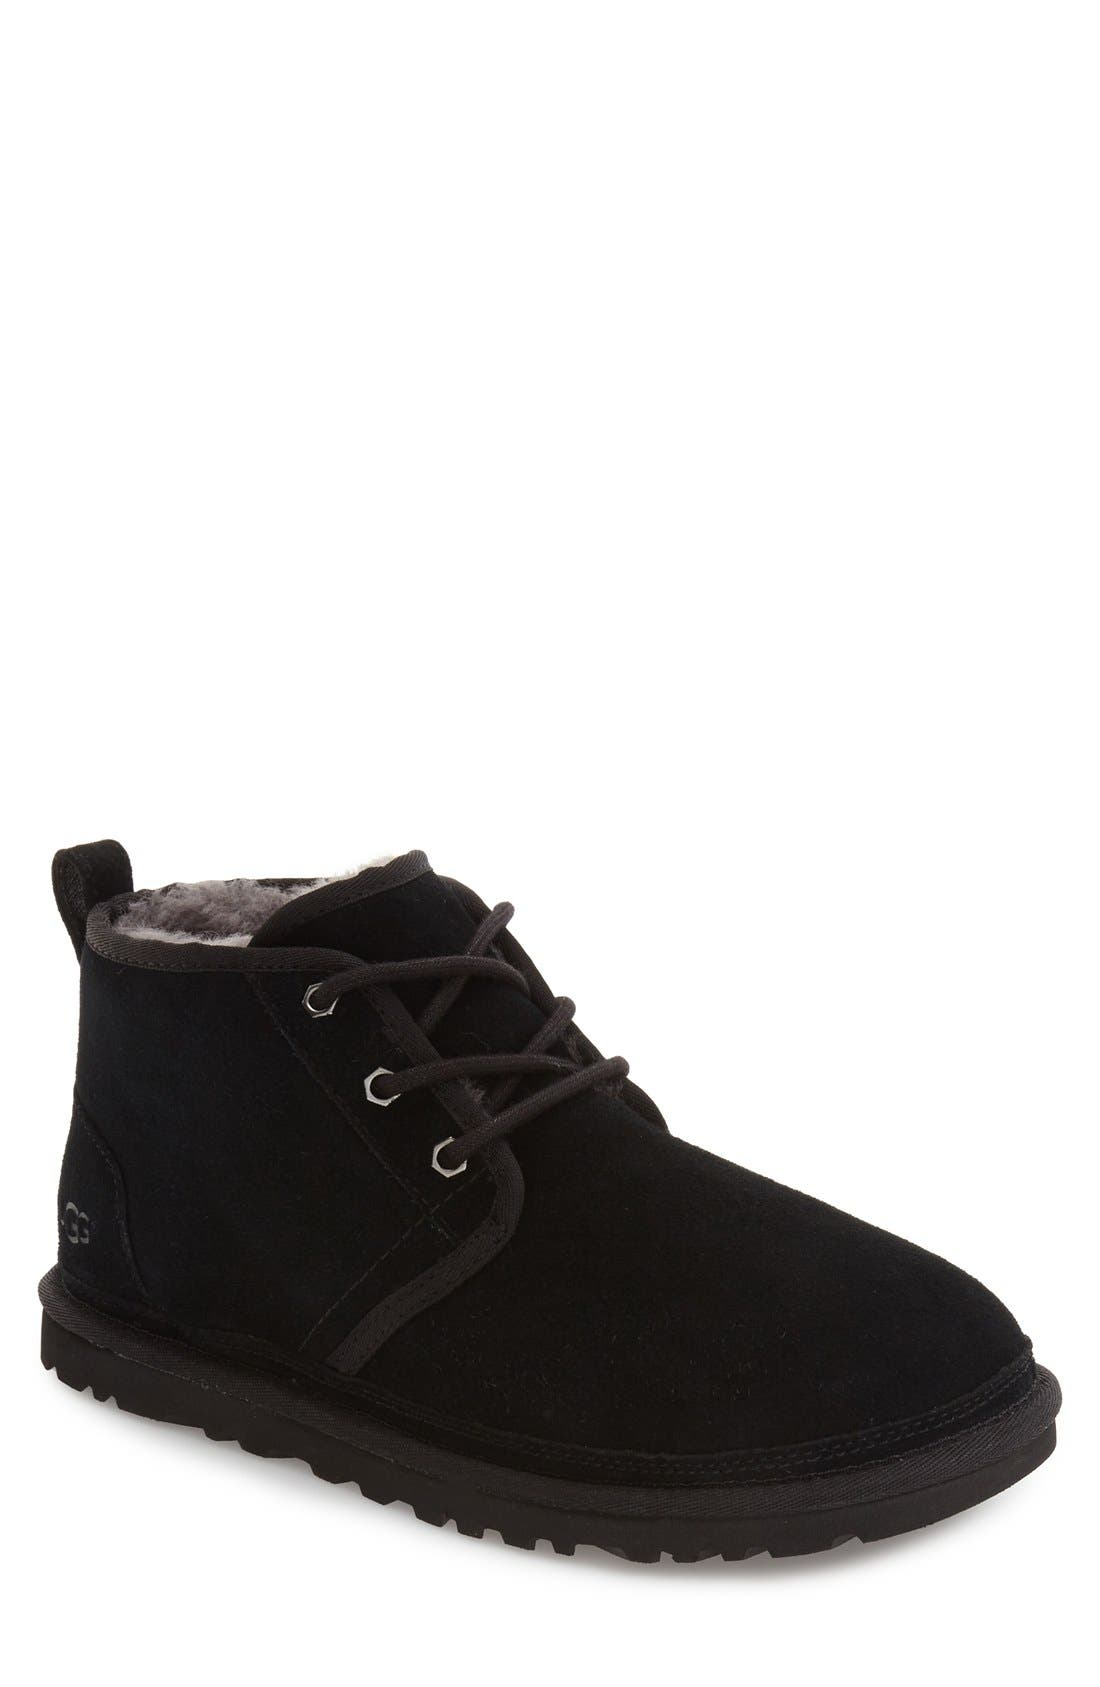 uggs boots mens shoes